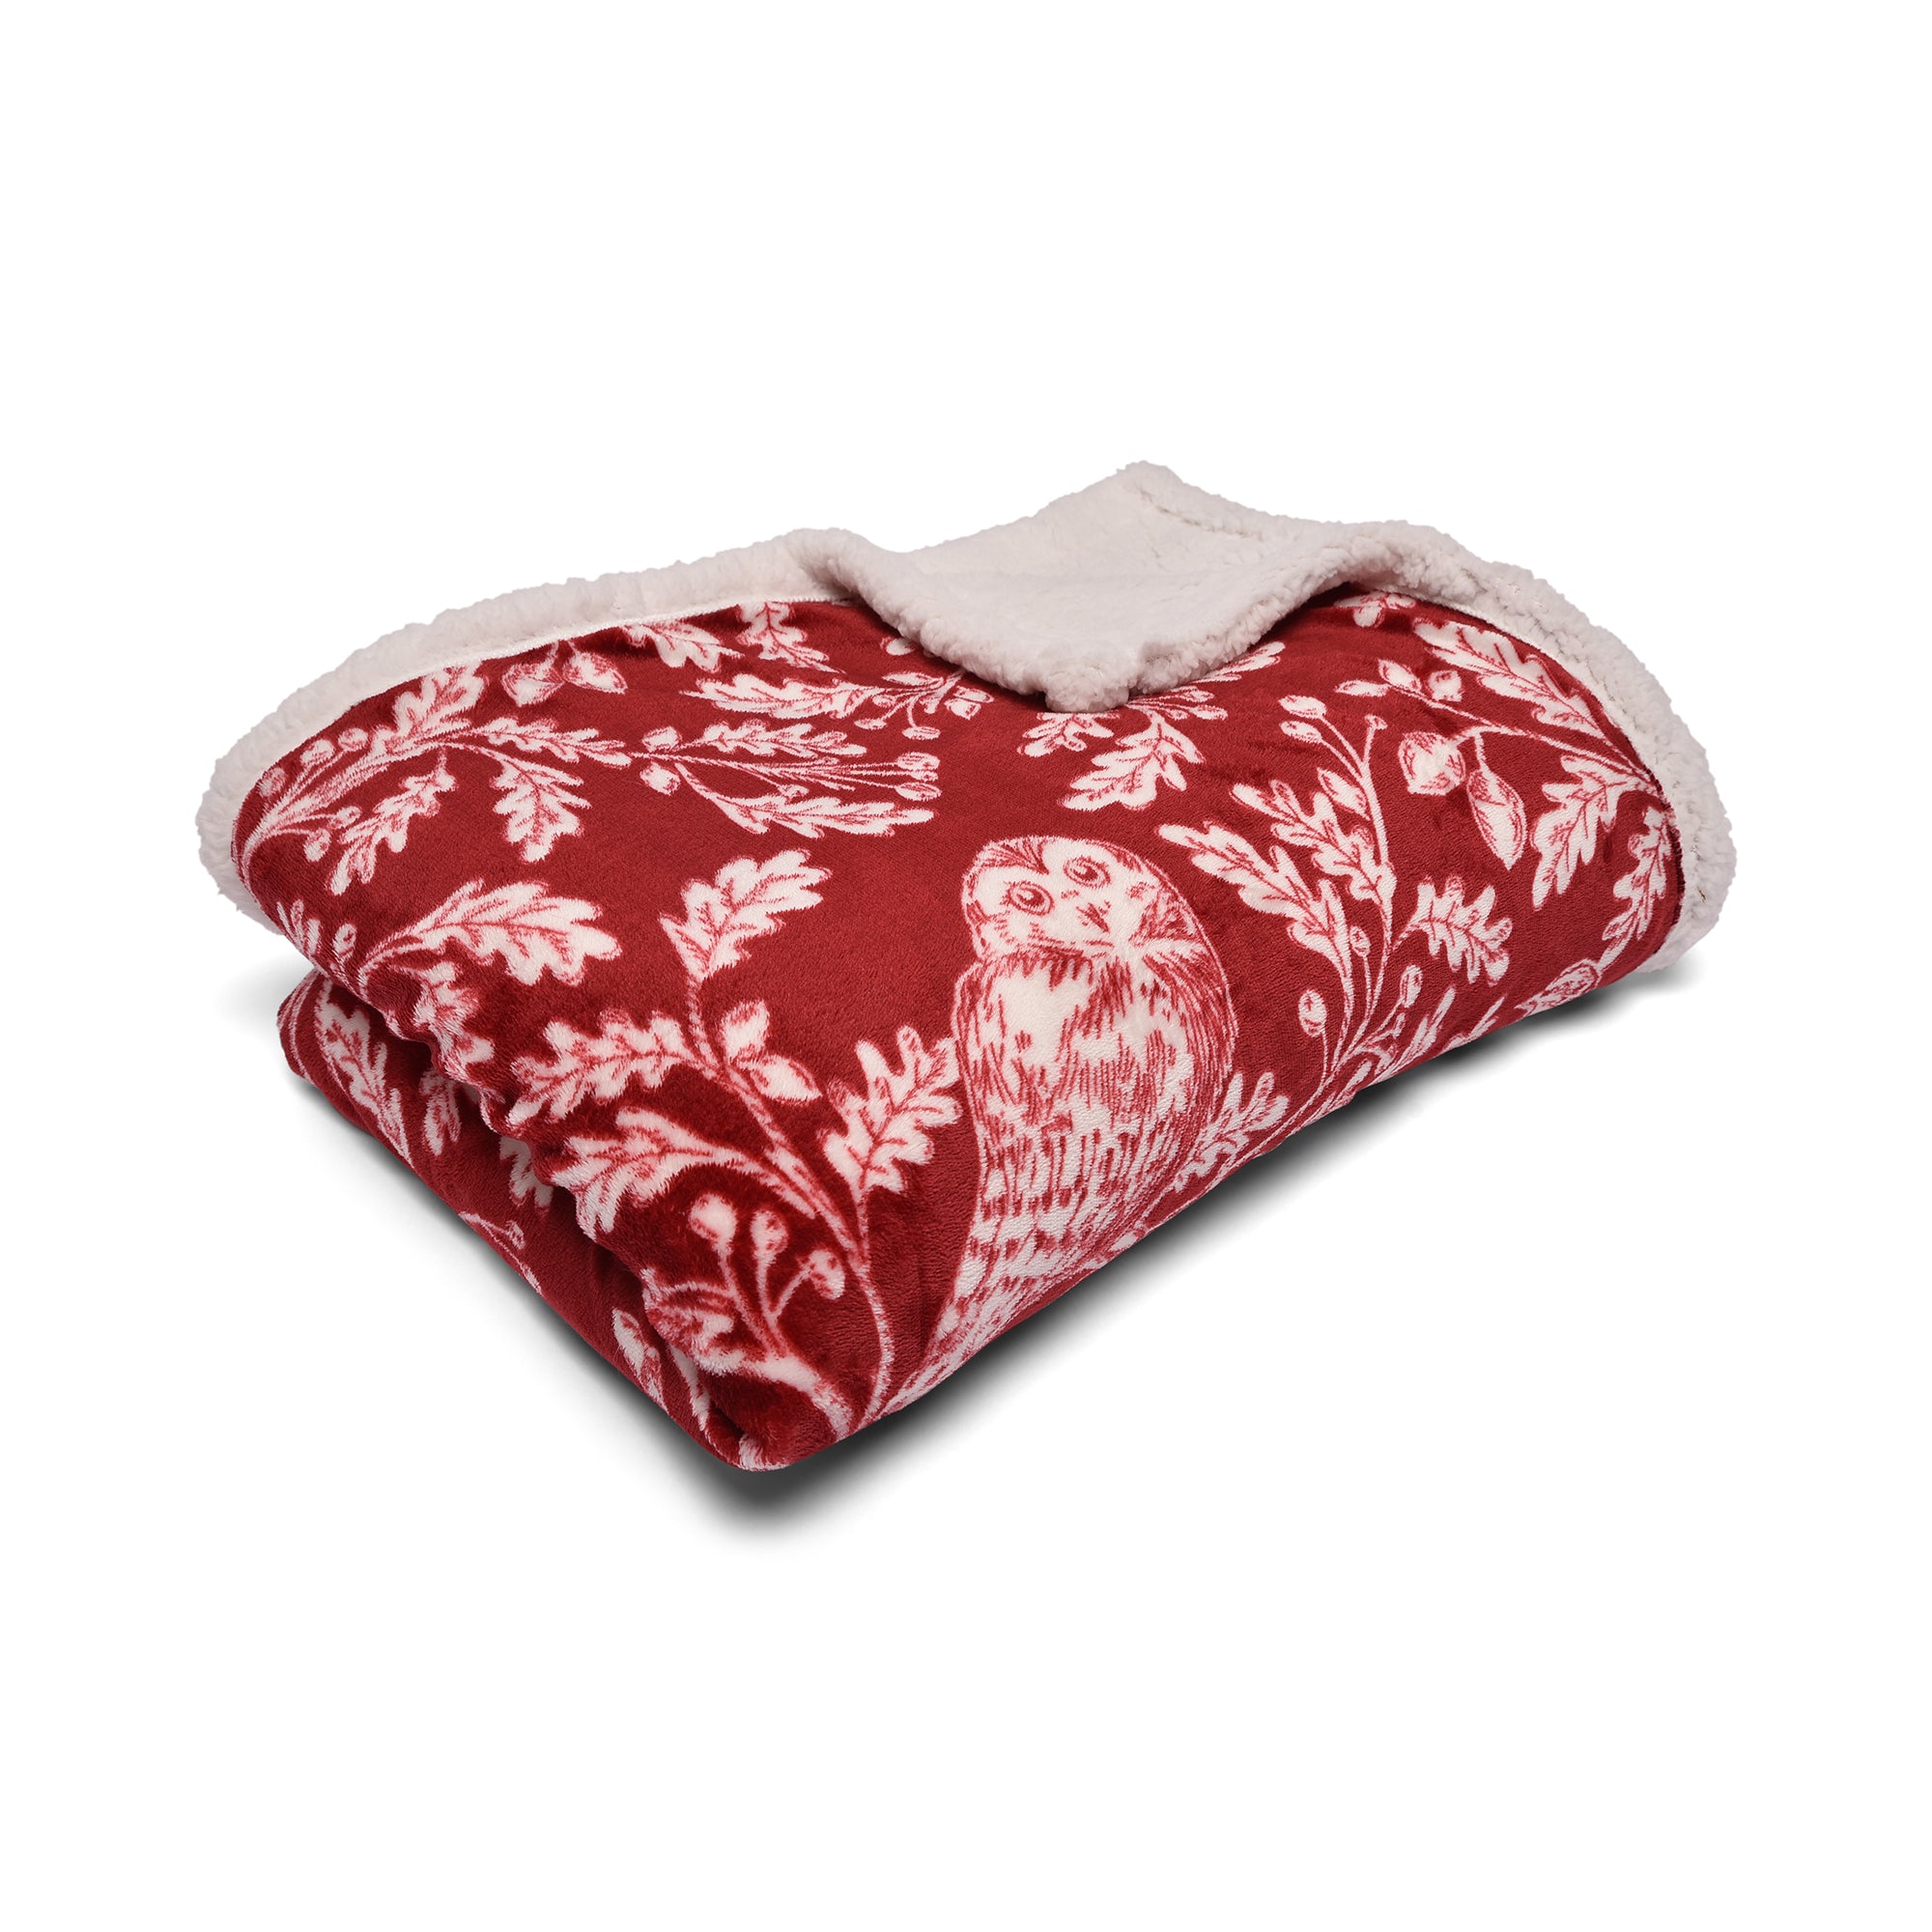 Bedspread Woodland Owls by D&D Lodge in Red